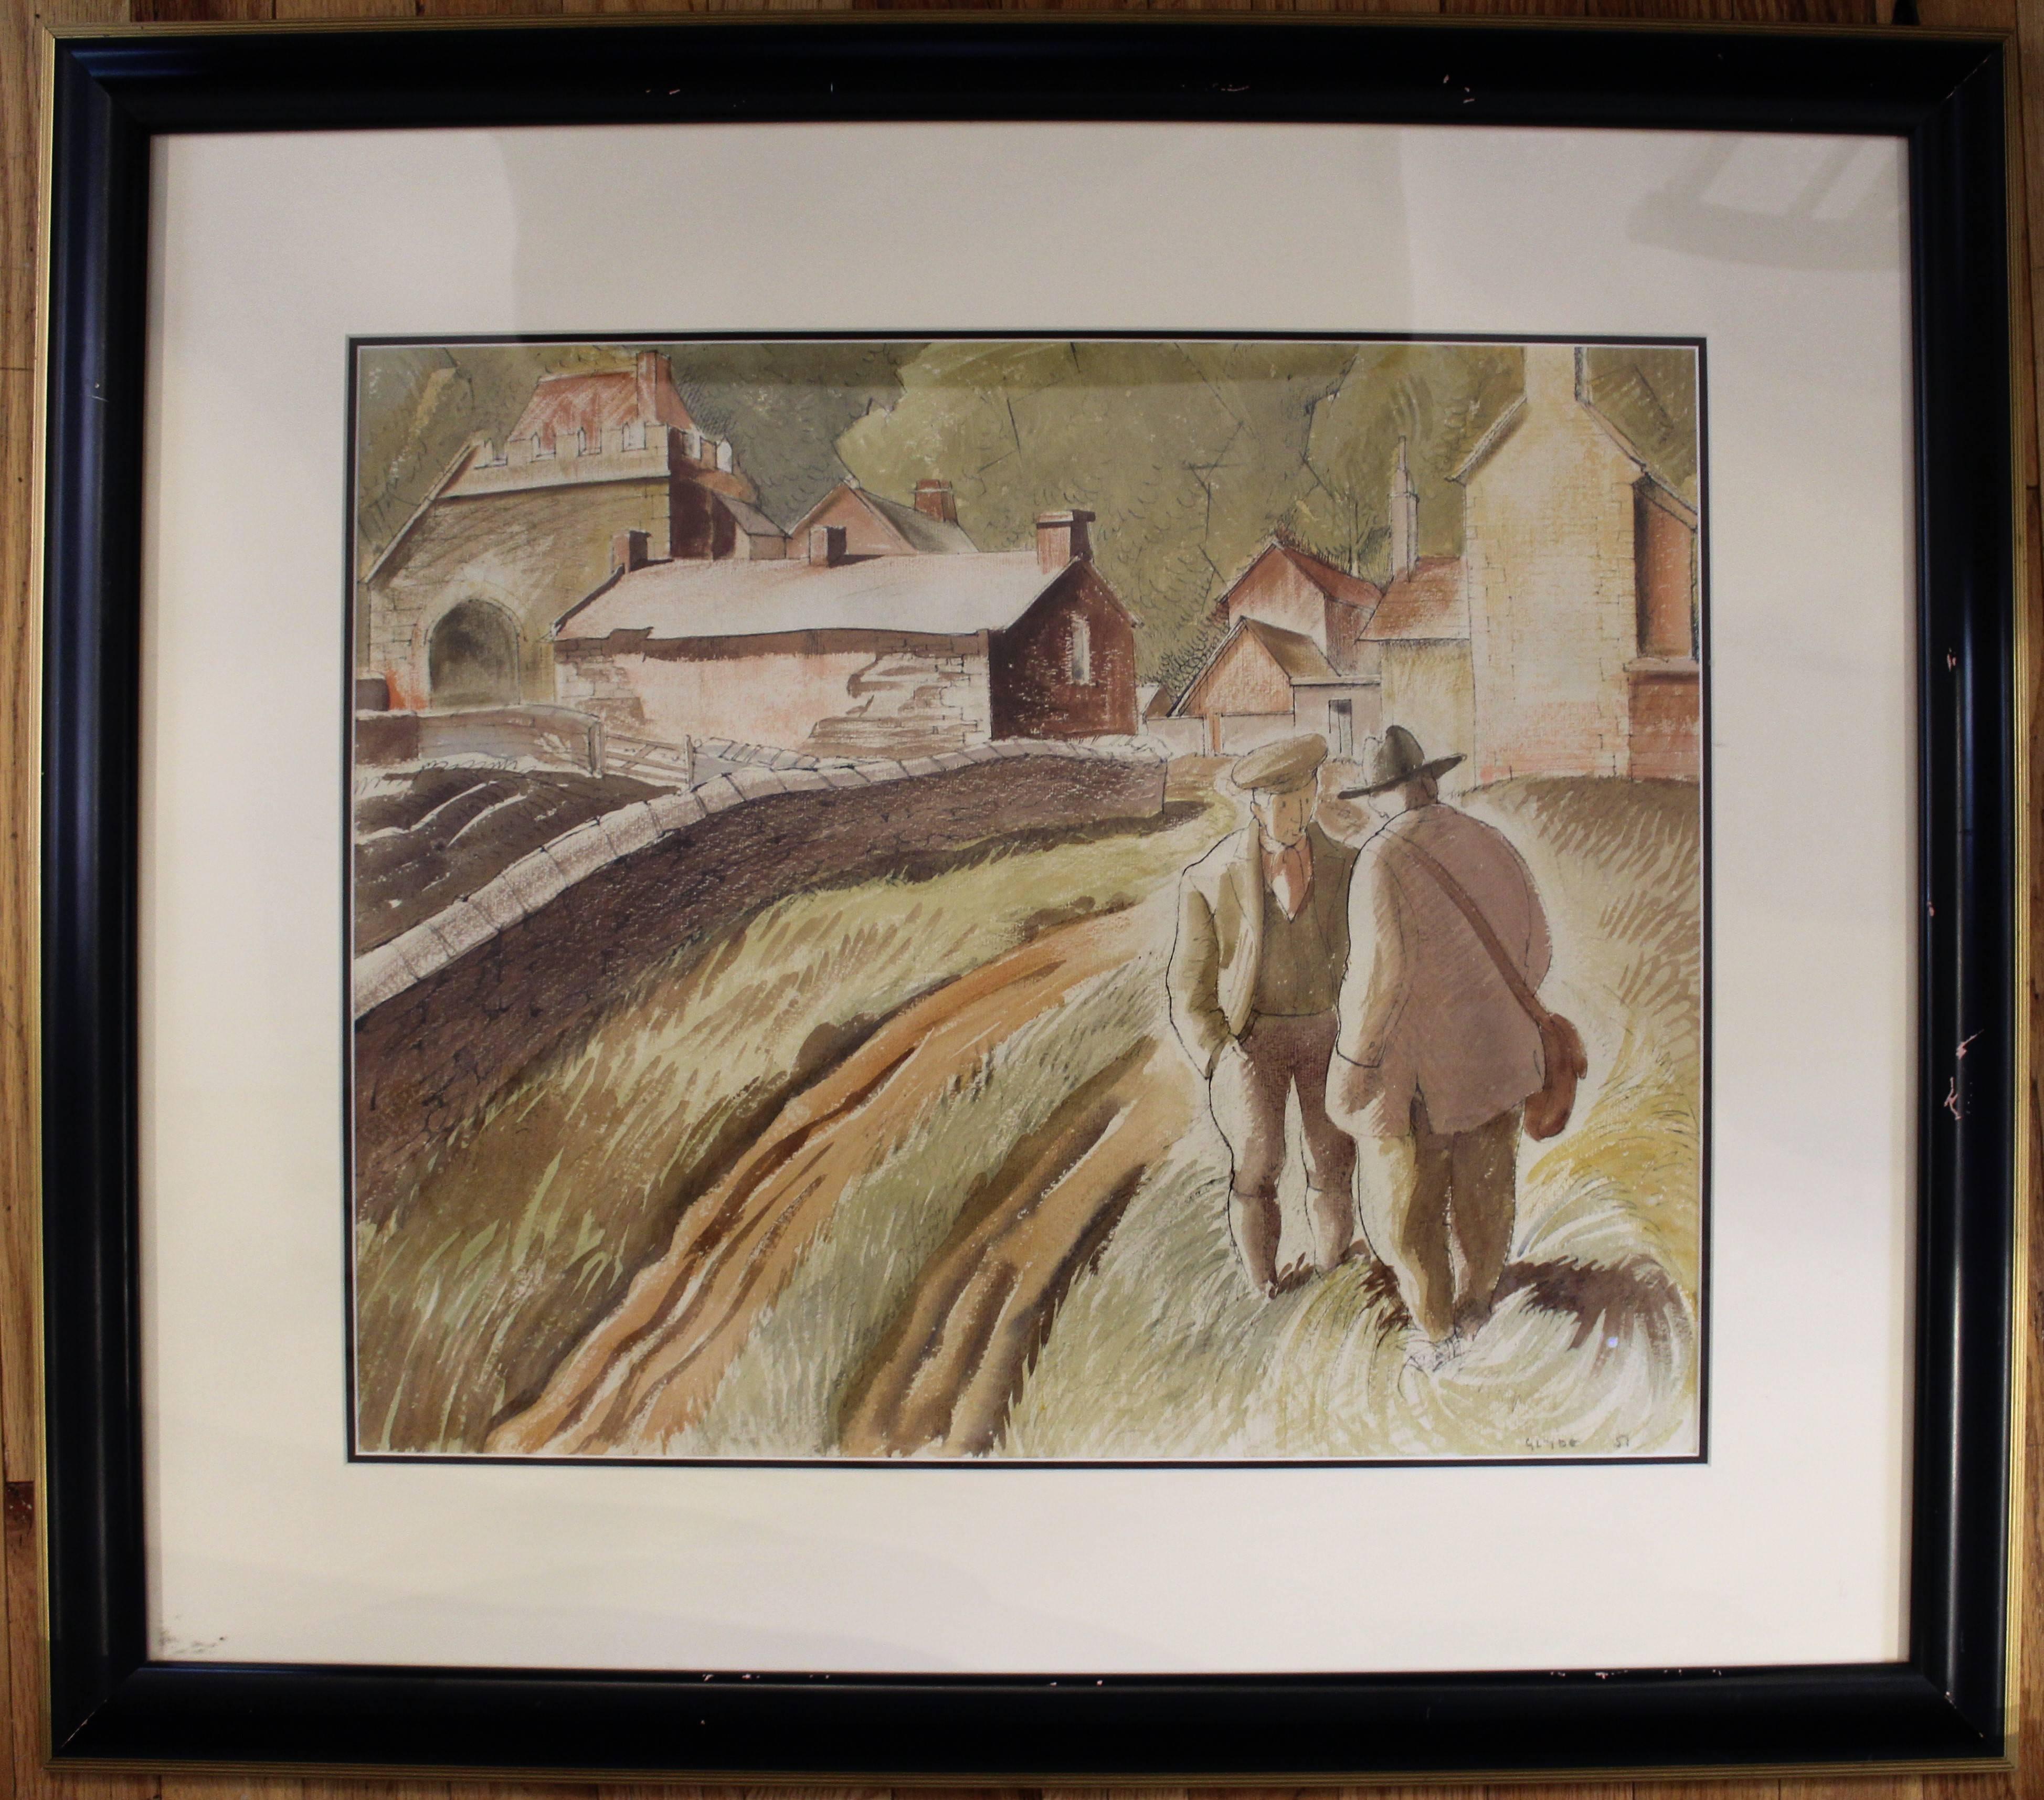 Henry George Glyde (Canadian 1906-1998) painting
Medium: Watercolor
Size:
Without frame: 16